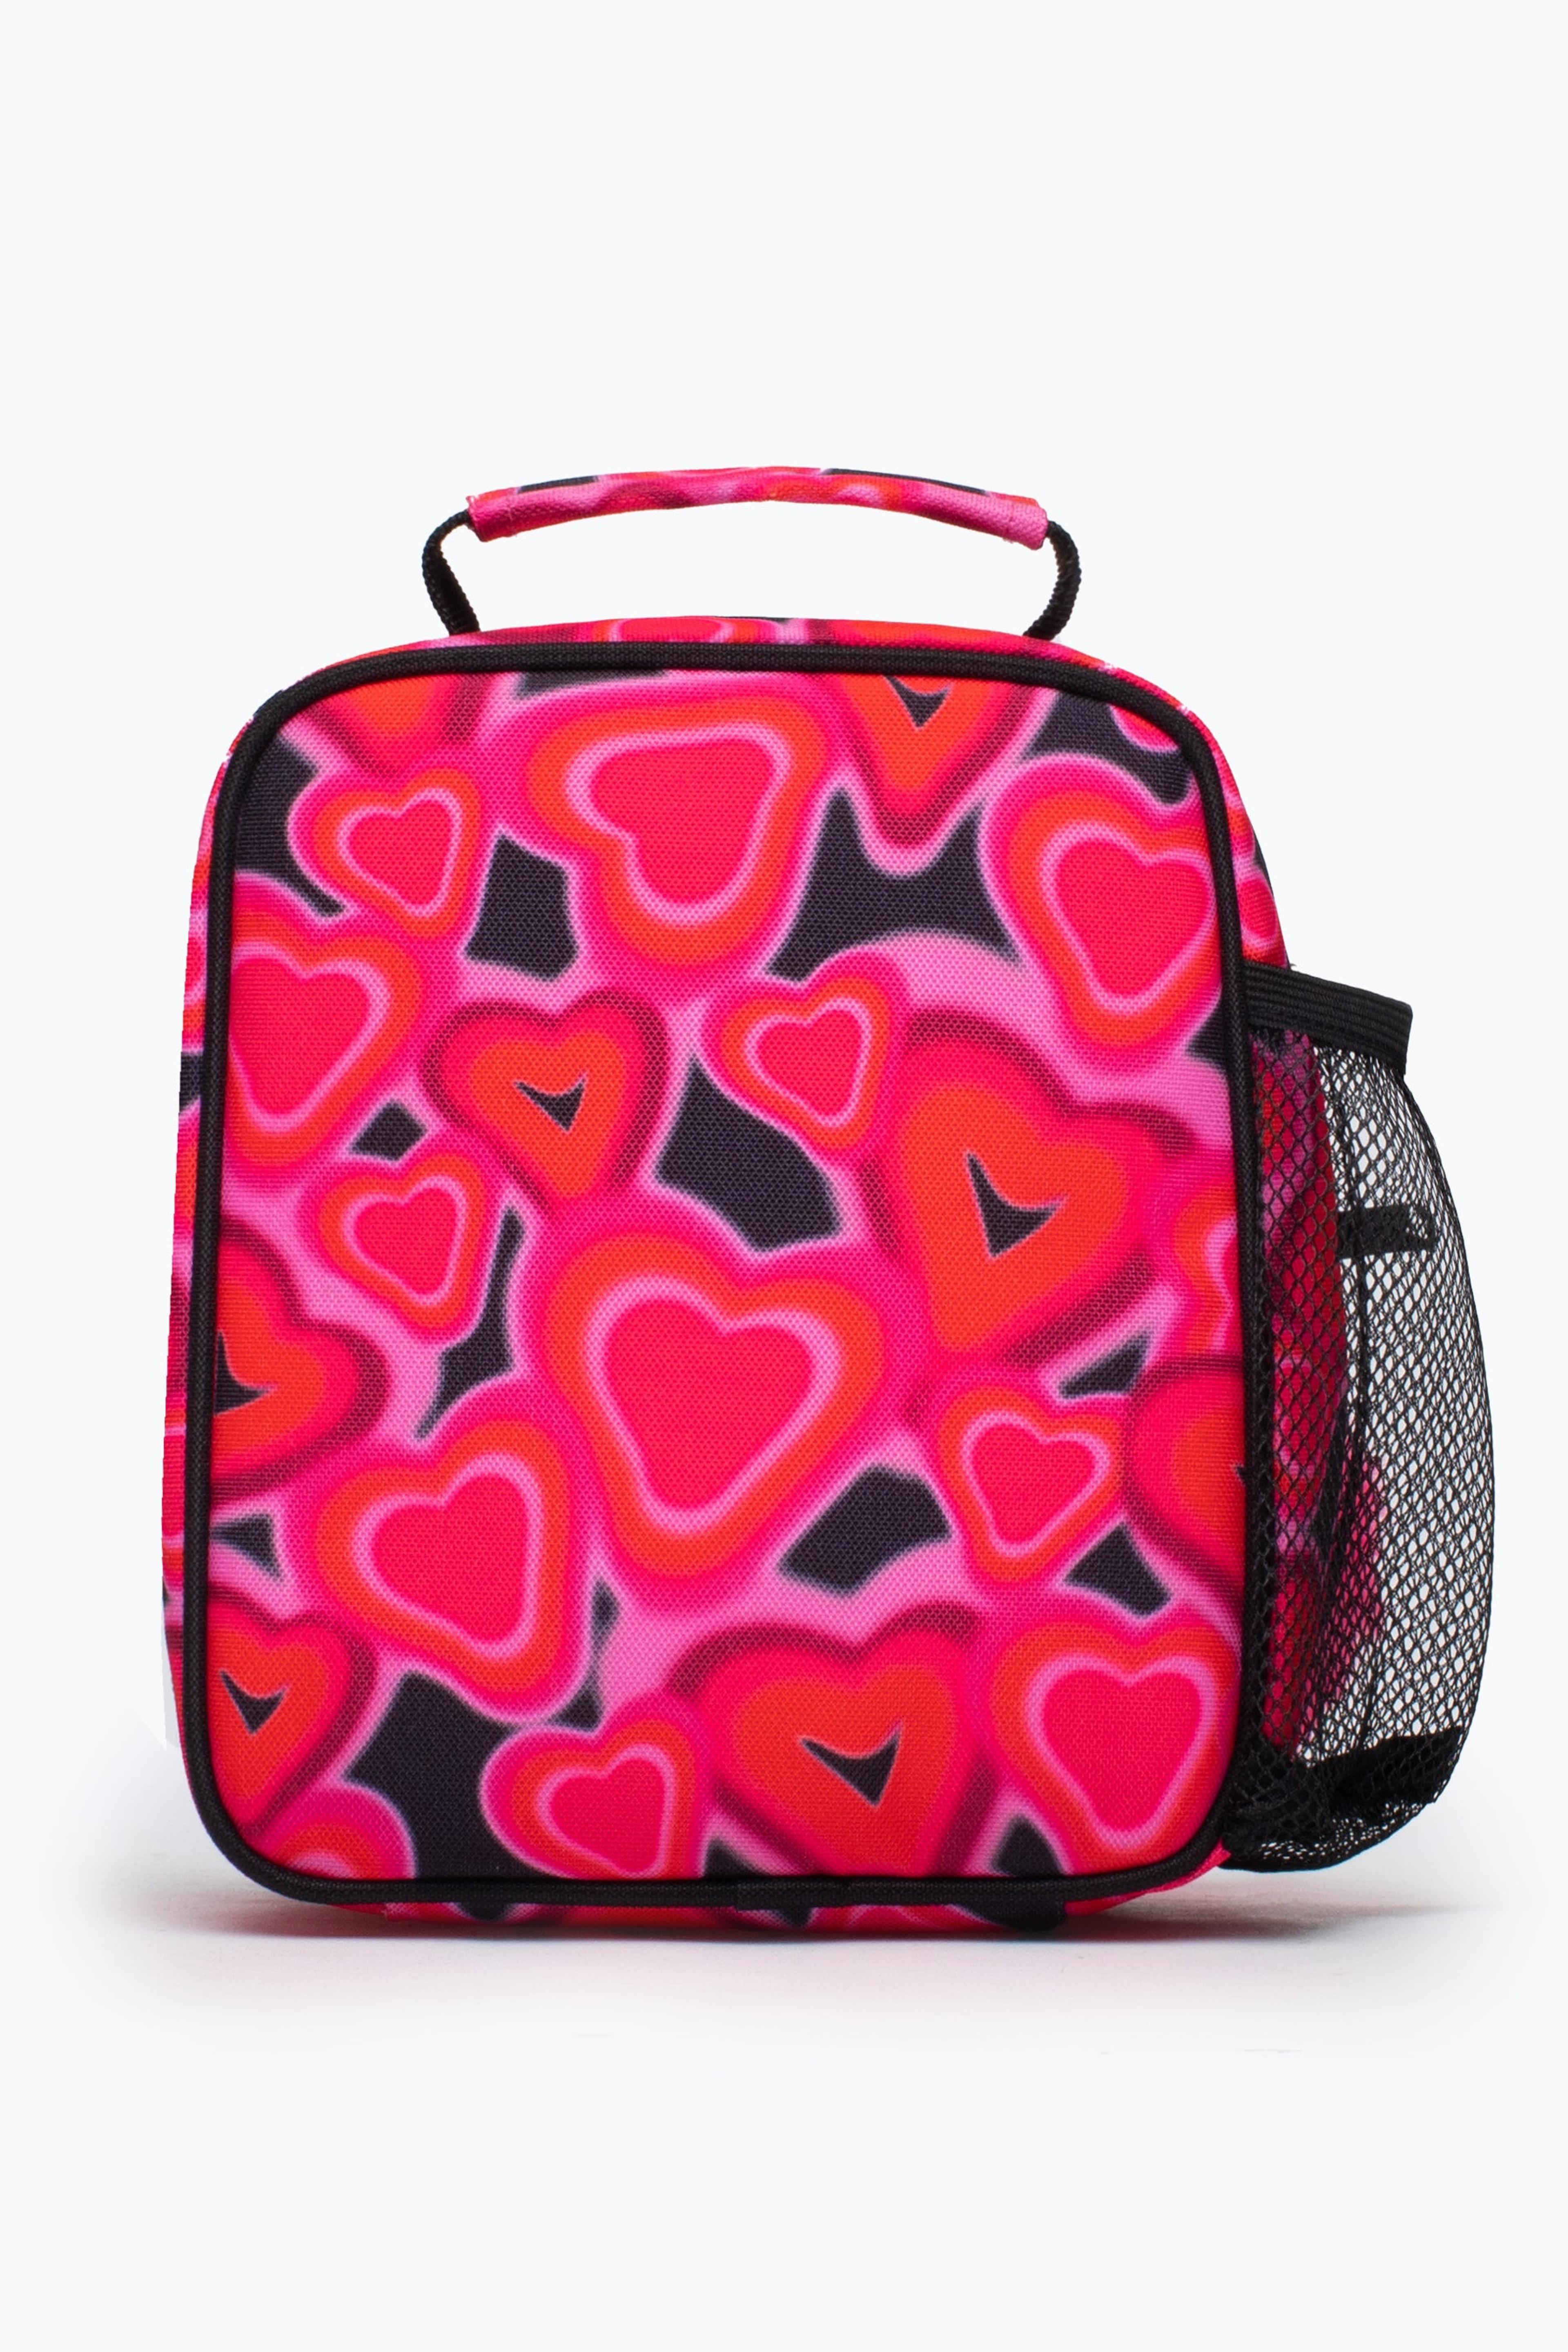 Alternate View 2 of HYPE KIDS UNISEX PINK SPRAY HEARTS LUNCH BOX